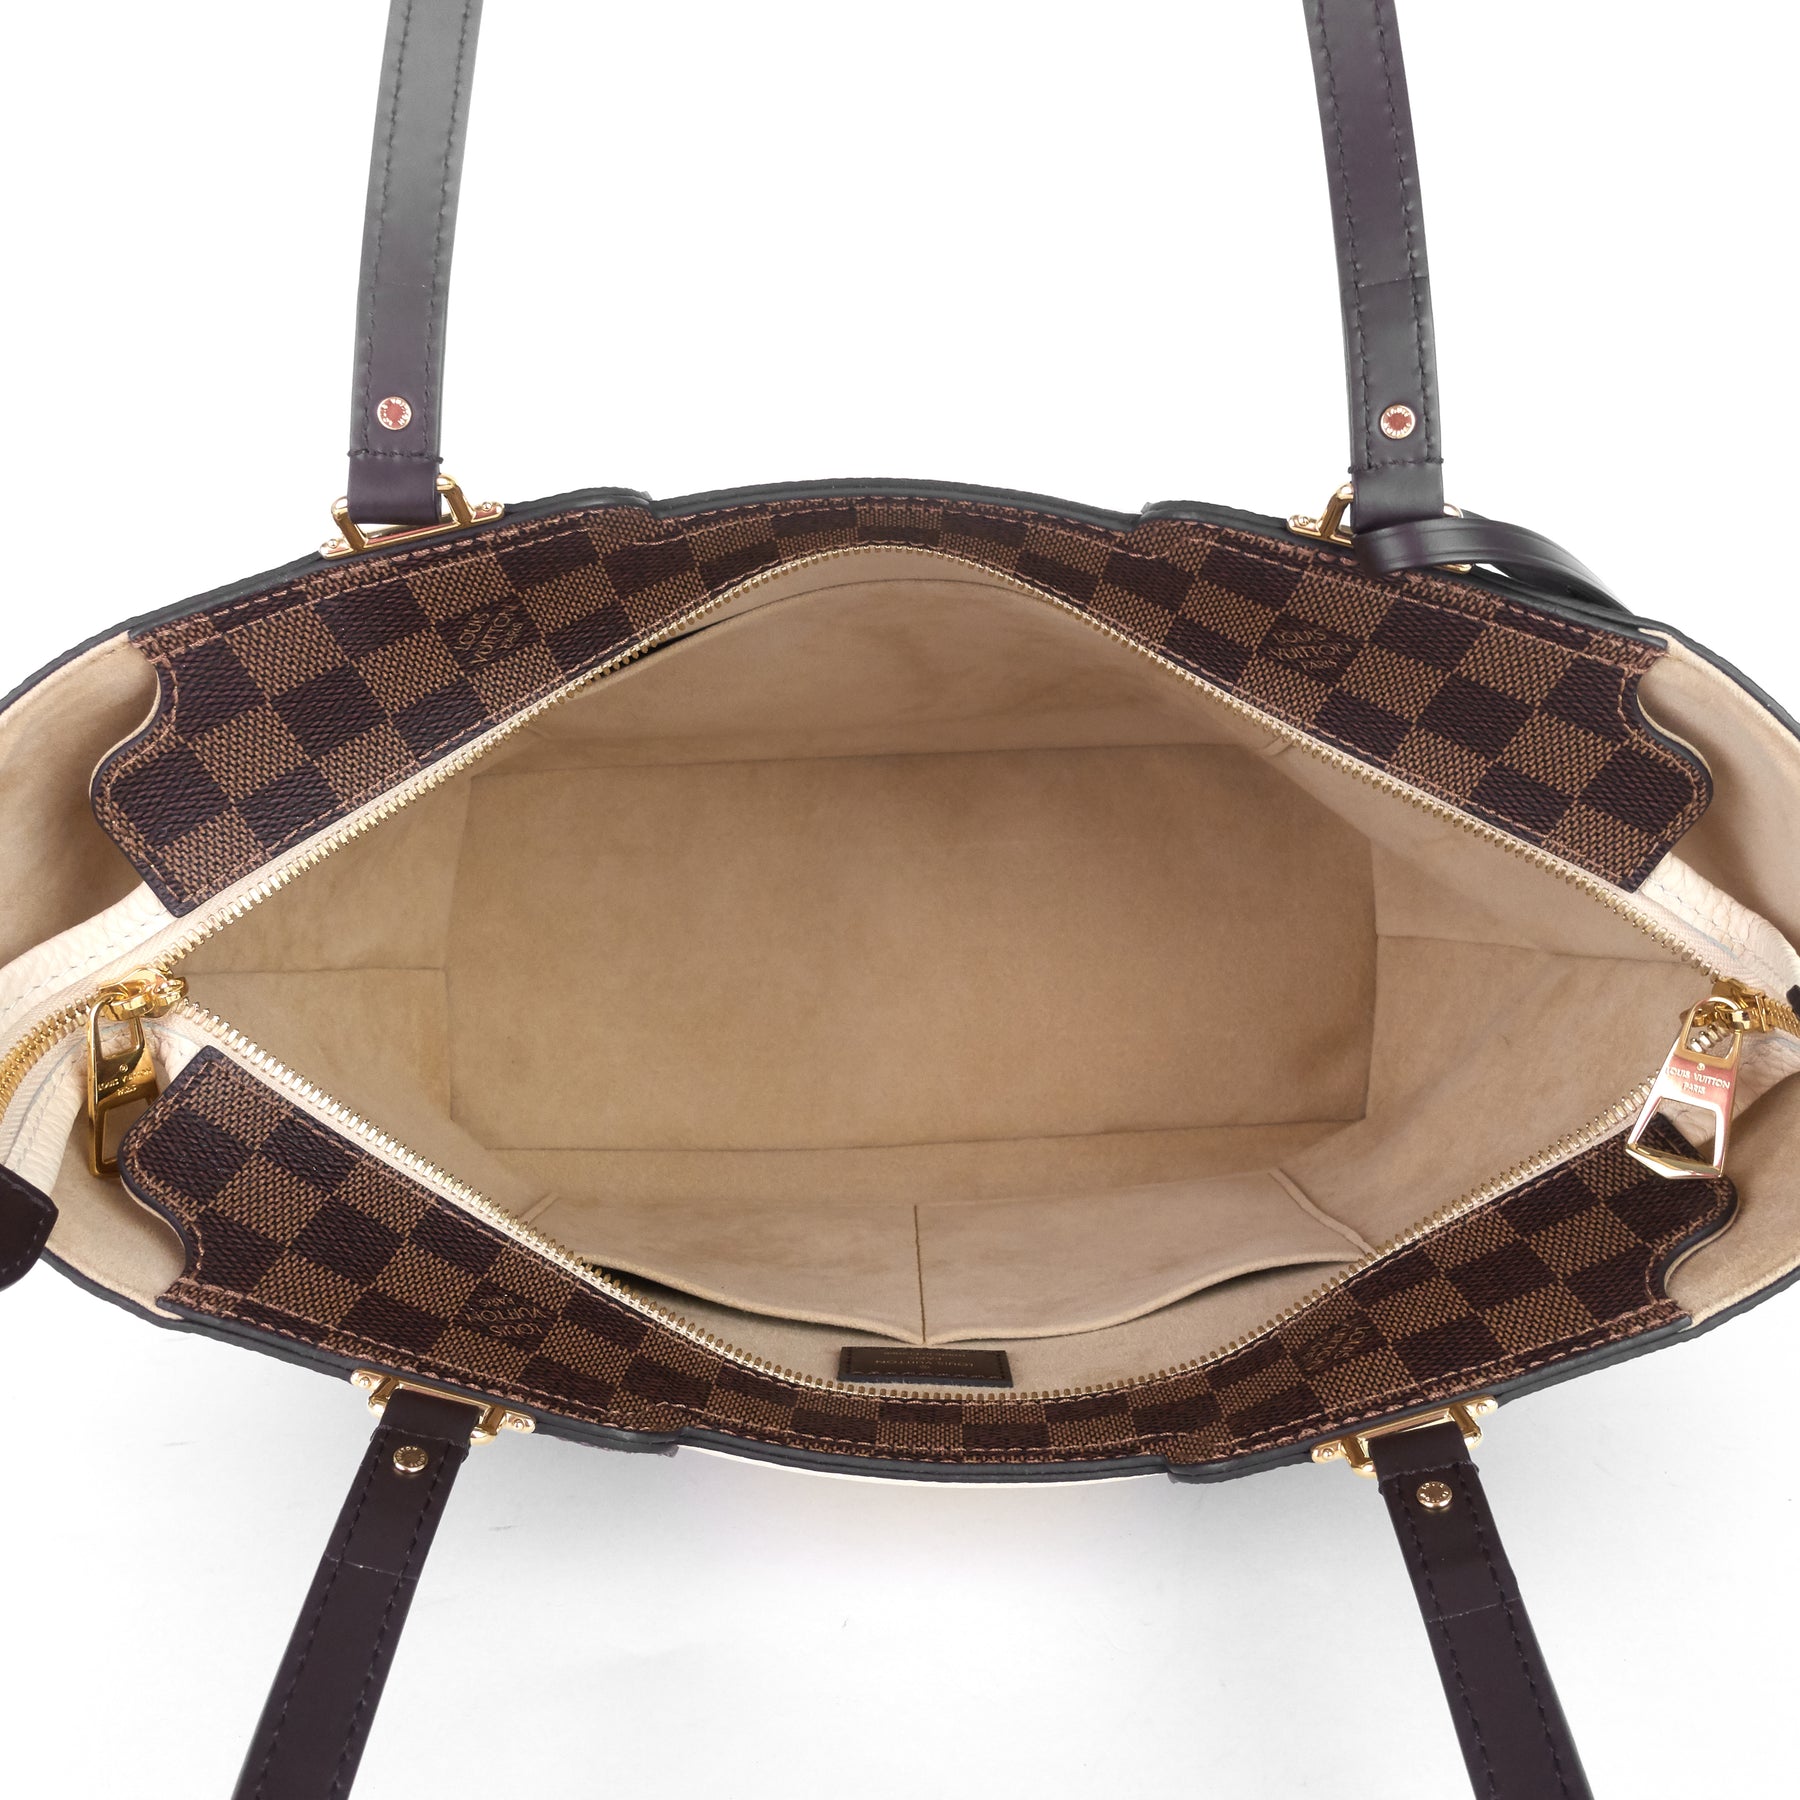 Louis Vuitton Damier Canvas and Taurillon Leather Jersey Tote Louis Vuitton